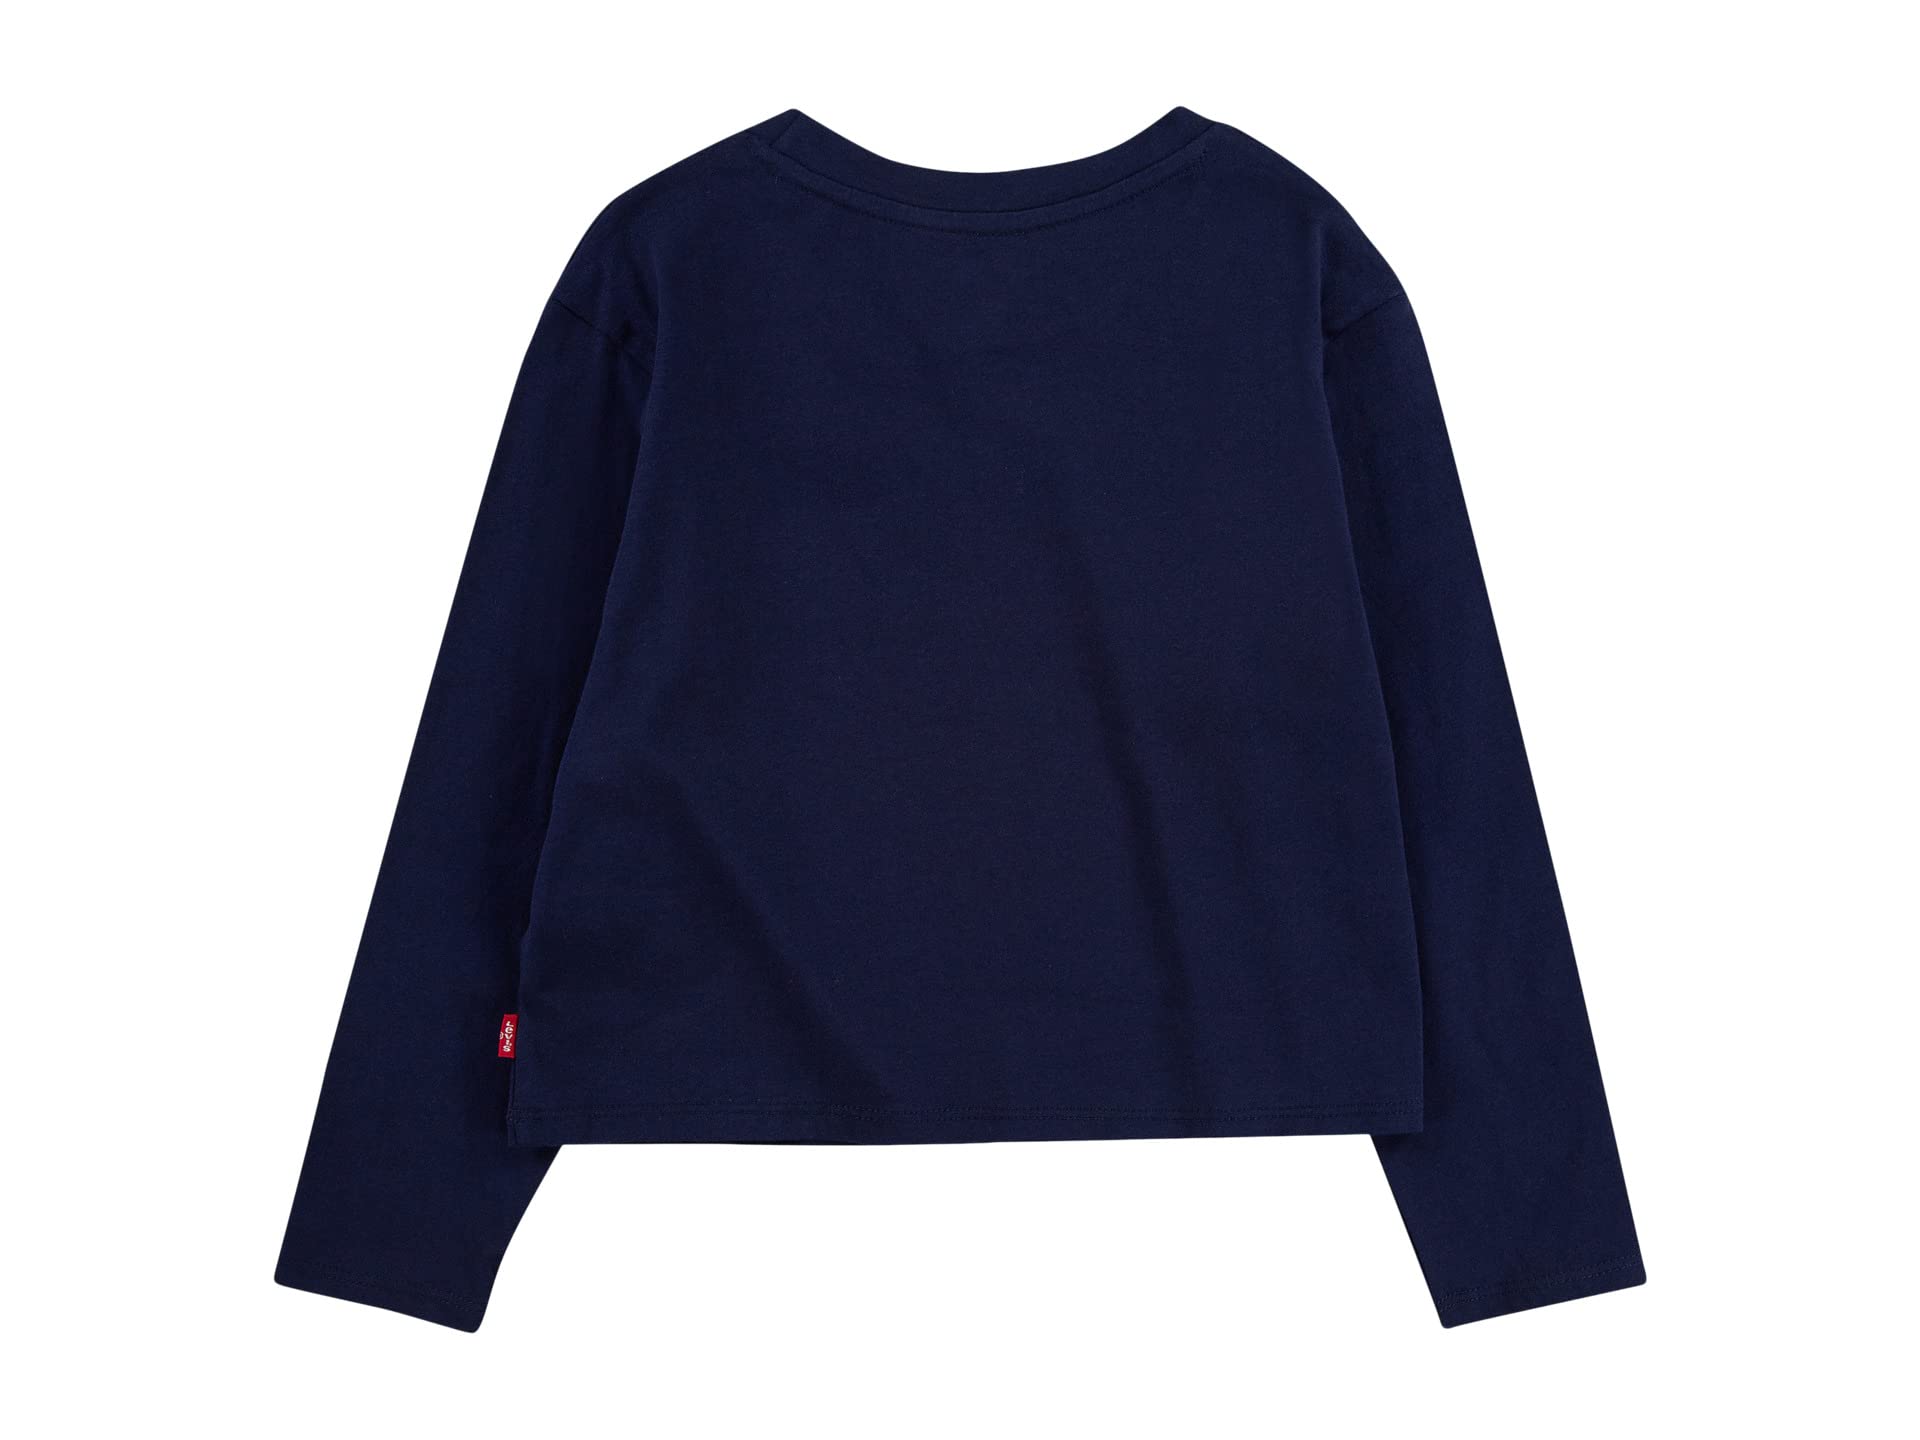 Image 2 of Cropped Long Sleeve Tee Shirt (Little Kids)